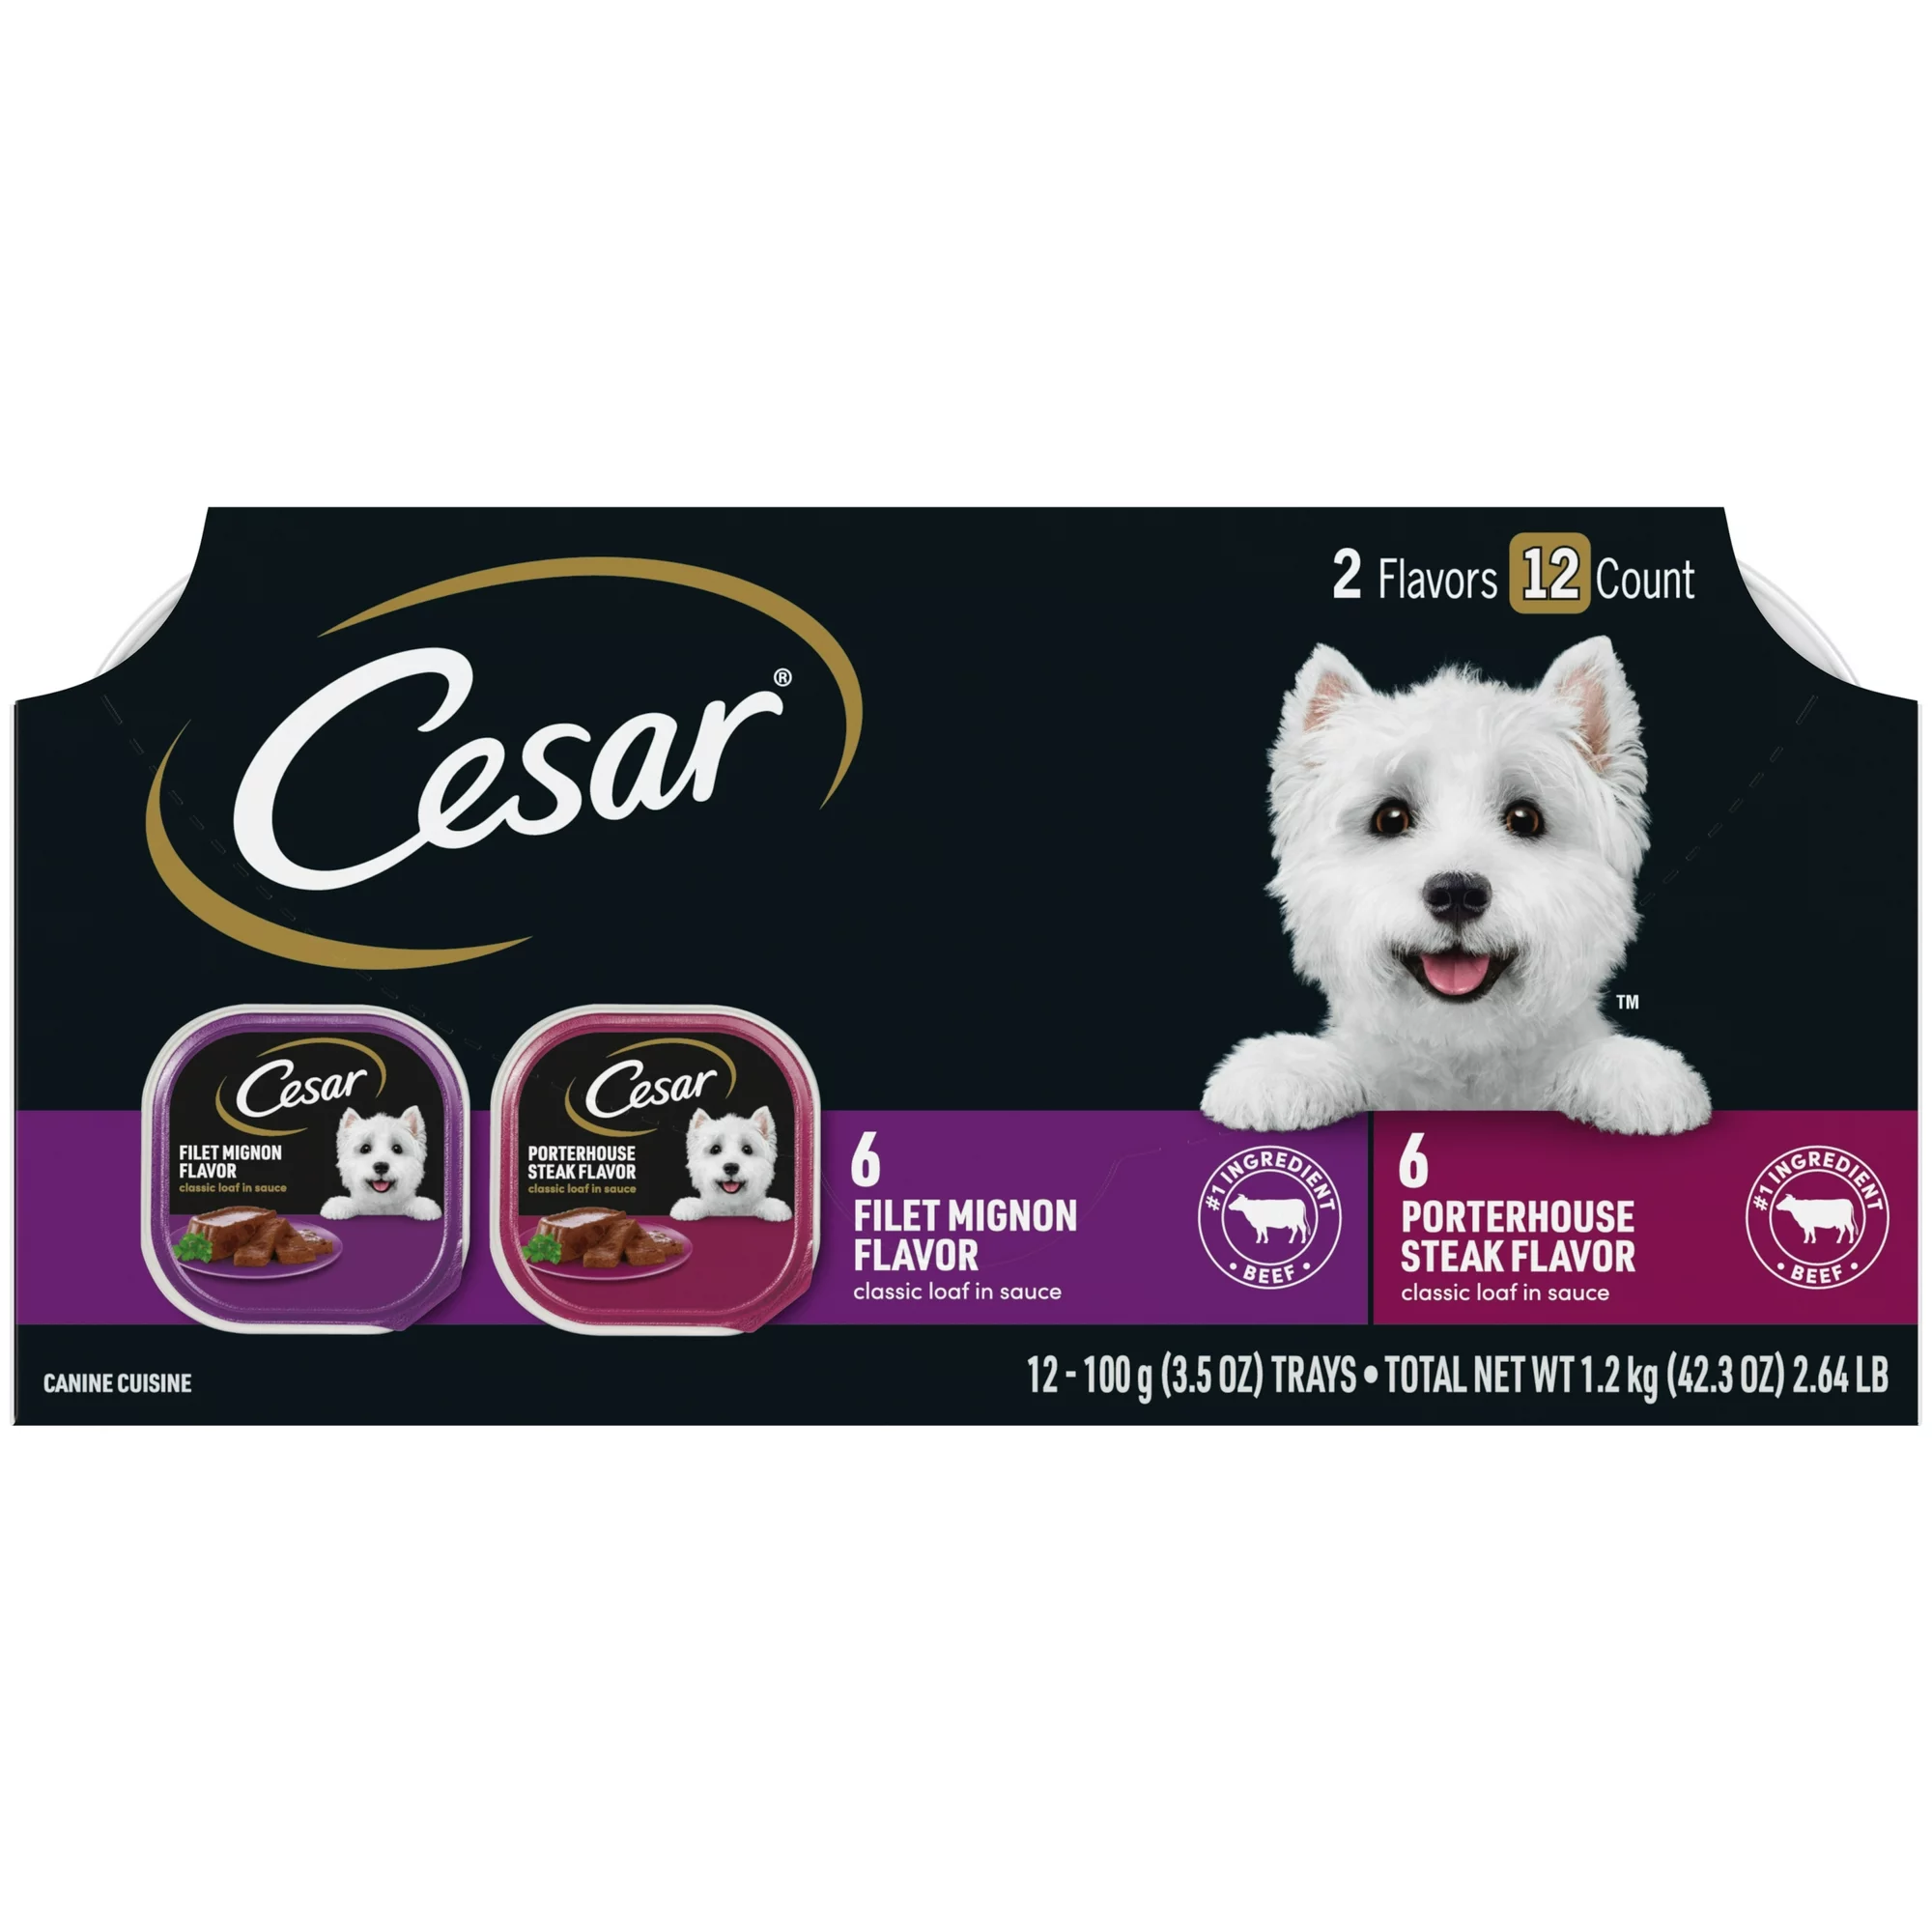 CESAR Classic Loaf in Sauce Beef Flavors Wet Dog Food Variety Pack 12 Pack 3 5 oz Trays 4b621717 c120 43f3 be1b 22cff9f718bf.90c17f2d587875b8d3179684adde7cd3